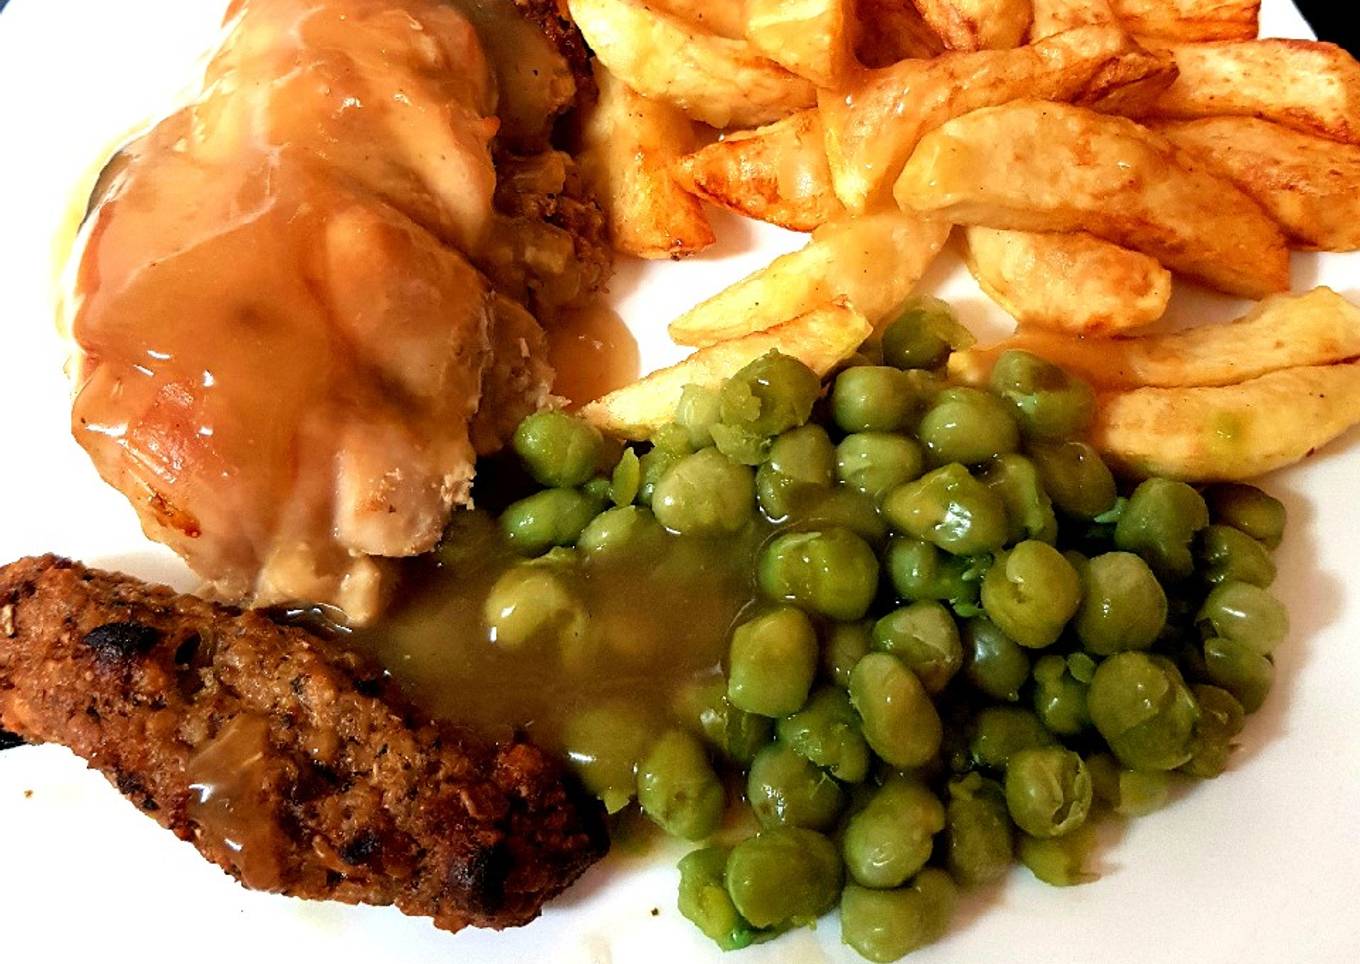 My Stuffed Peppered Chicken breast with Homemade Chips + Peas